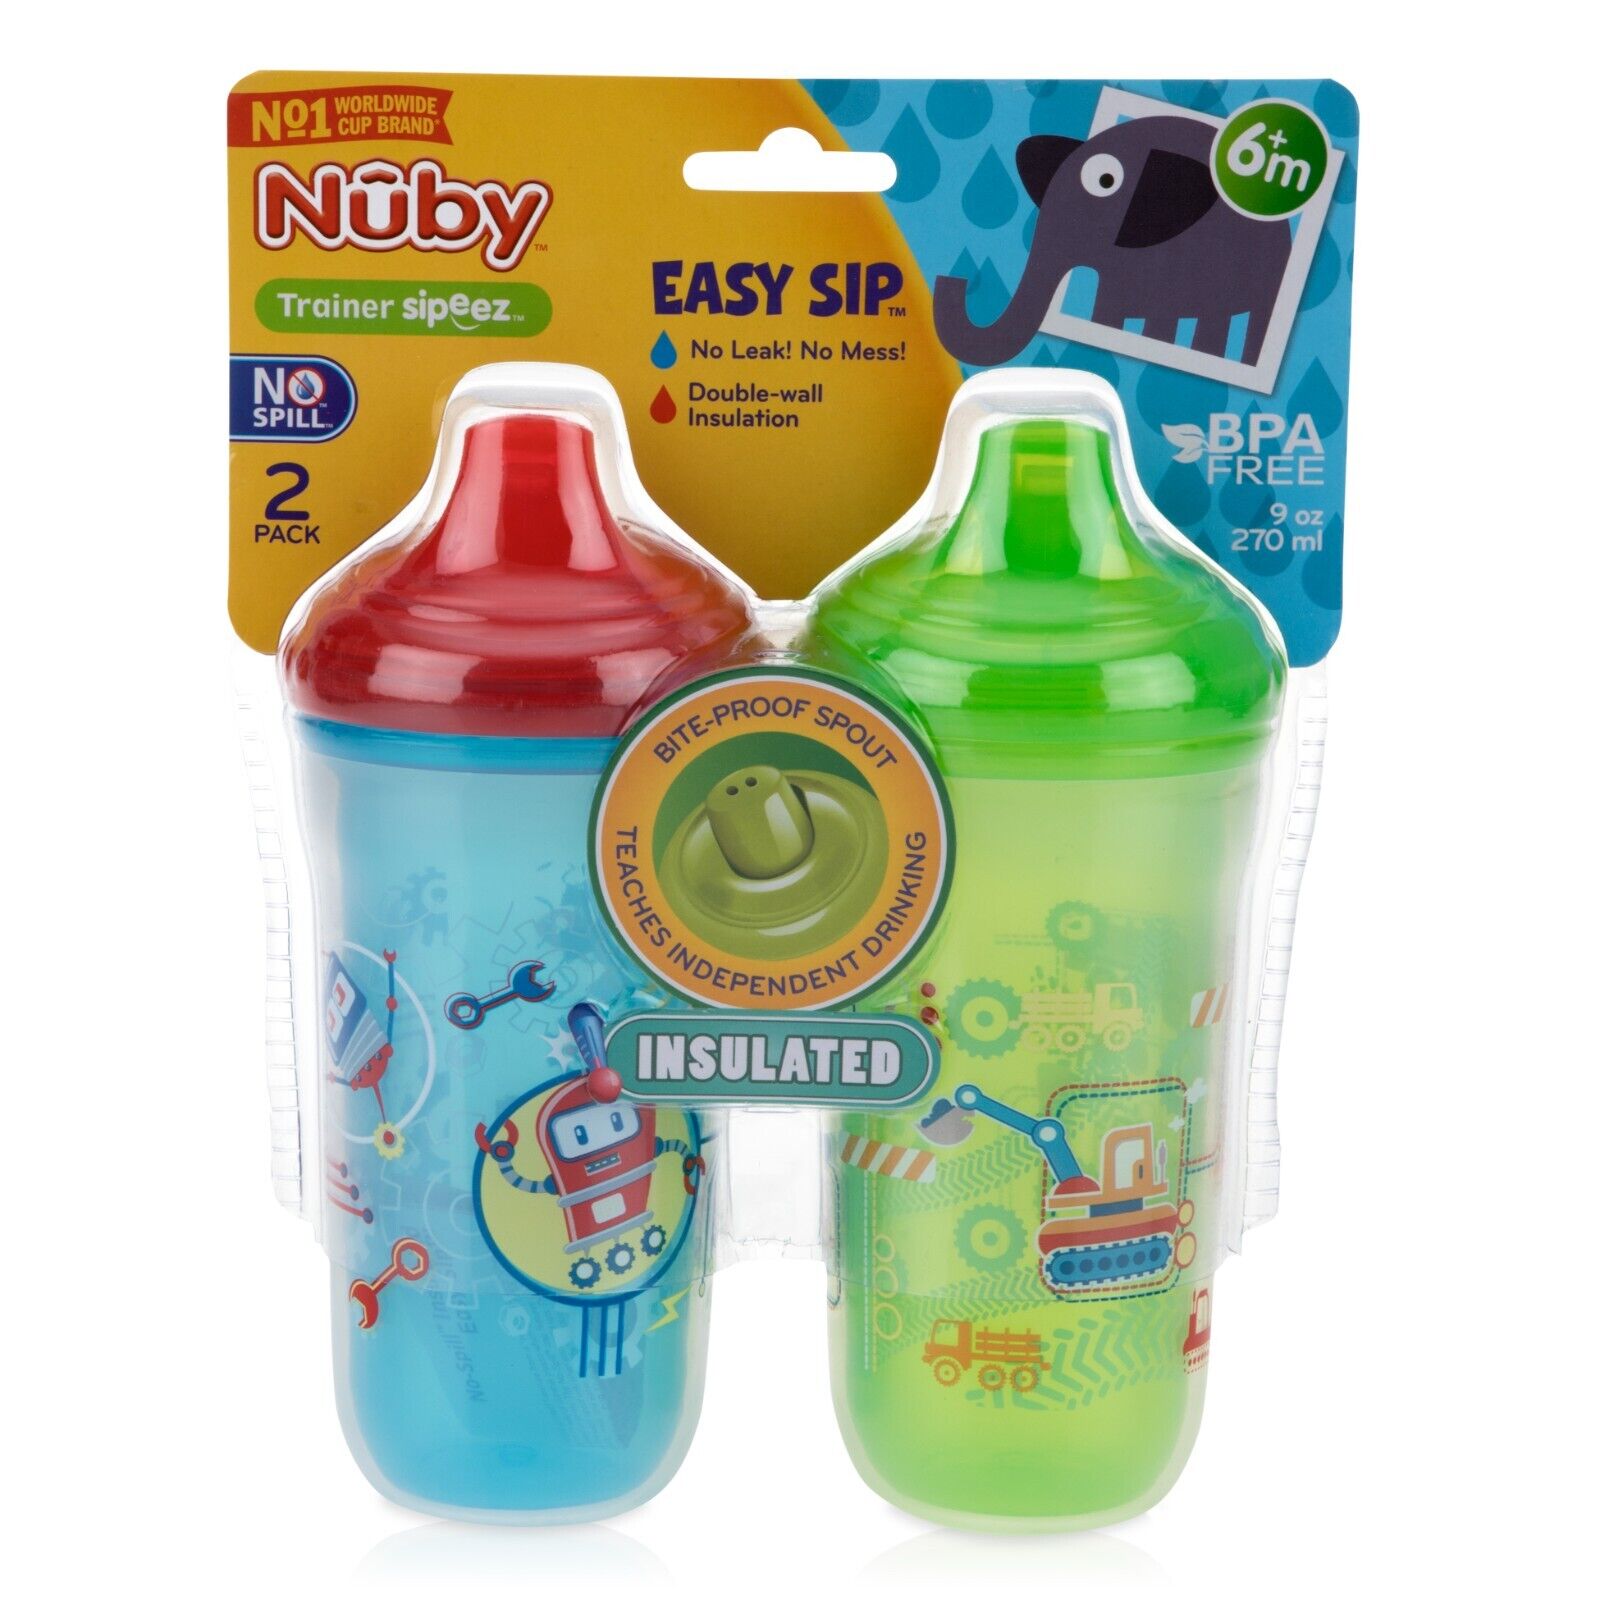 2-pack - No Spill & No Leaks - 9oz/270ml